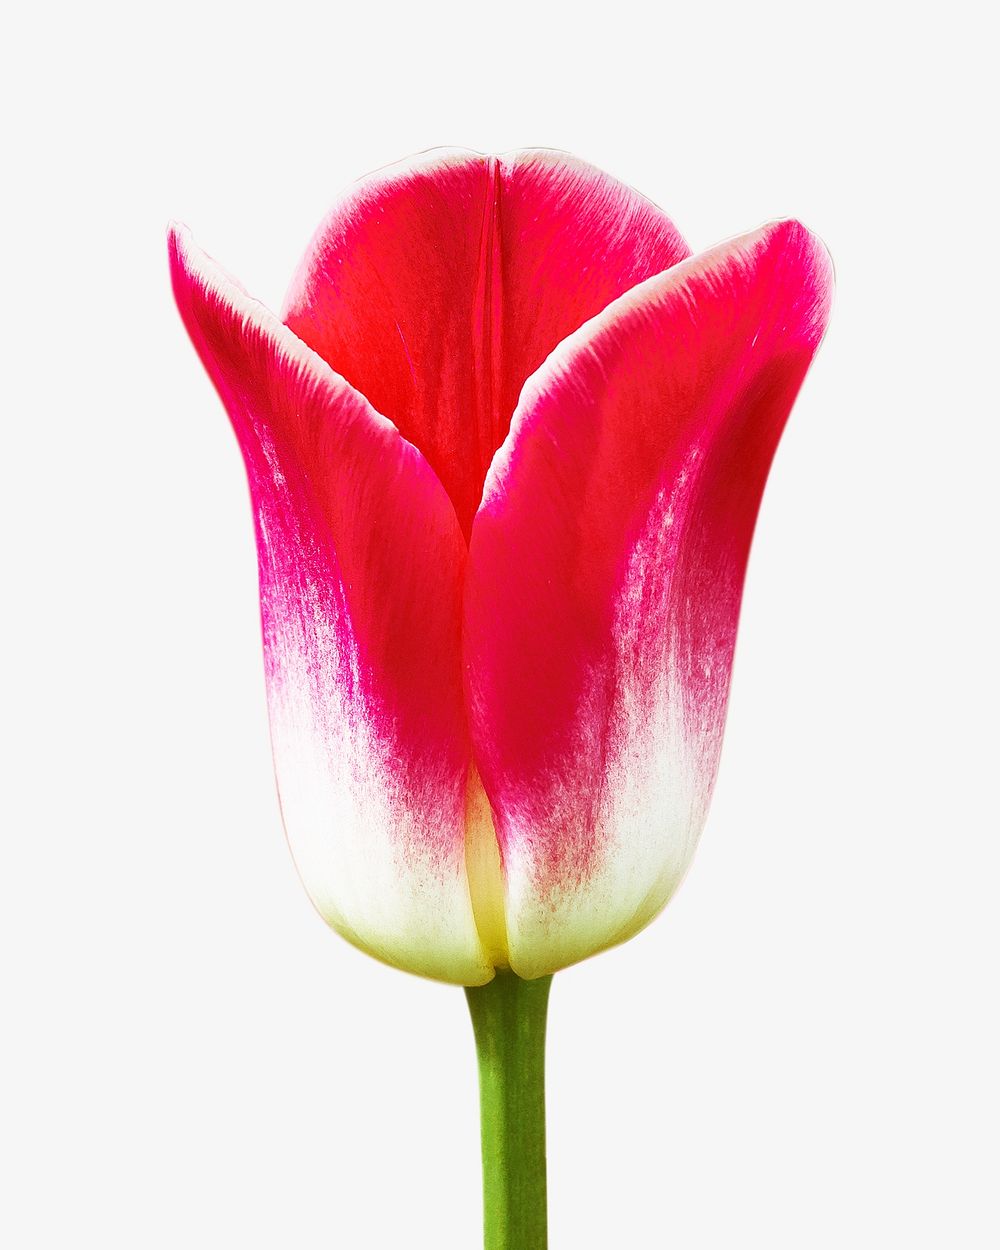 Red spring tulip isolated image on white